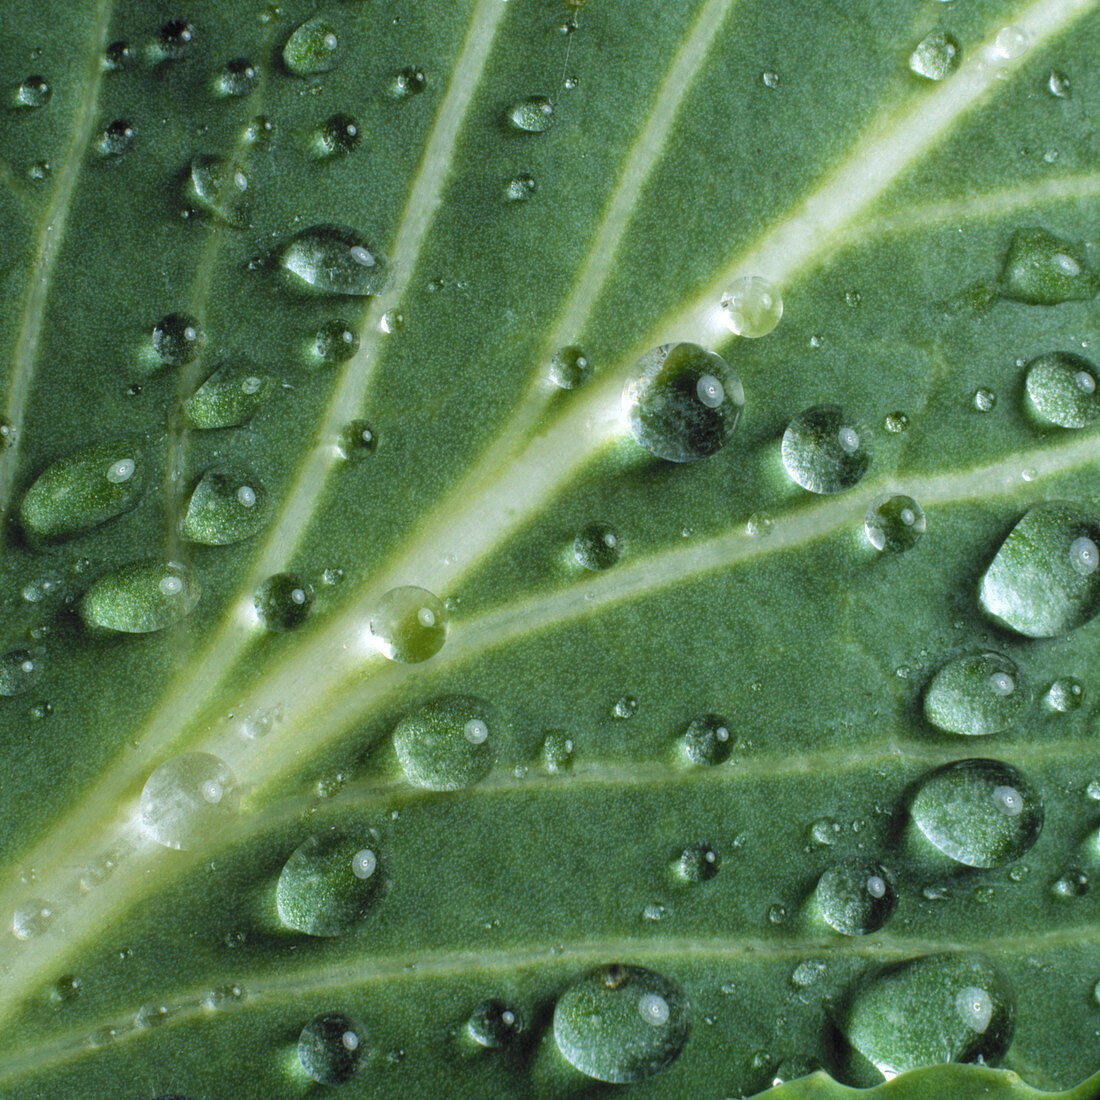 Water droplets on a cabbage leaf